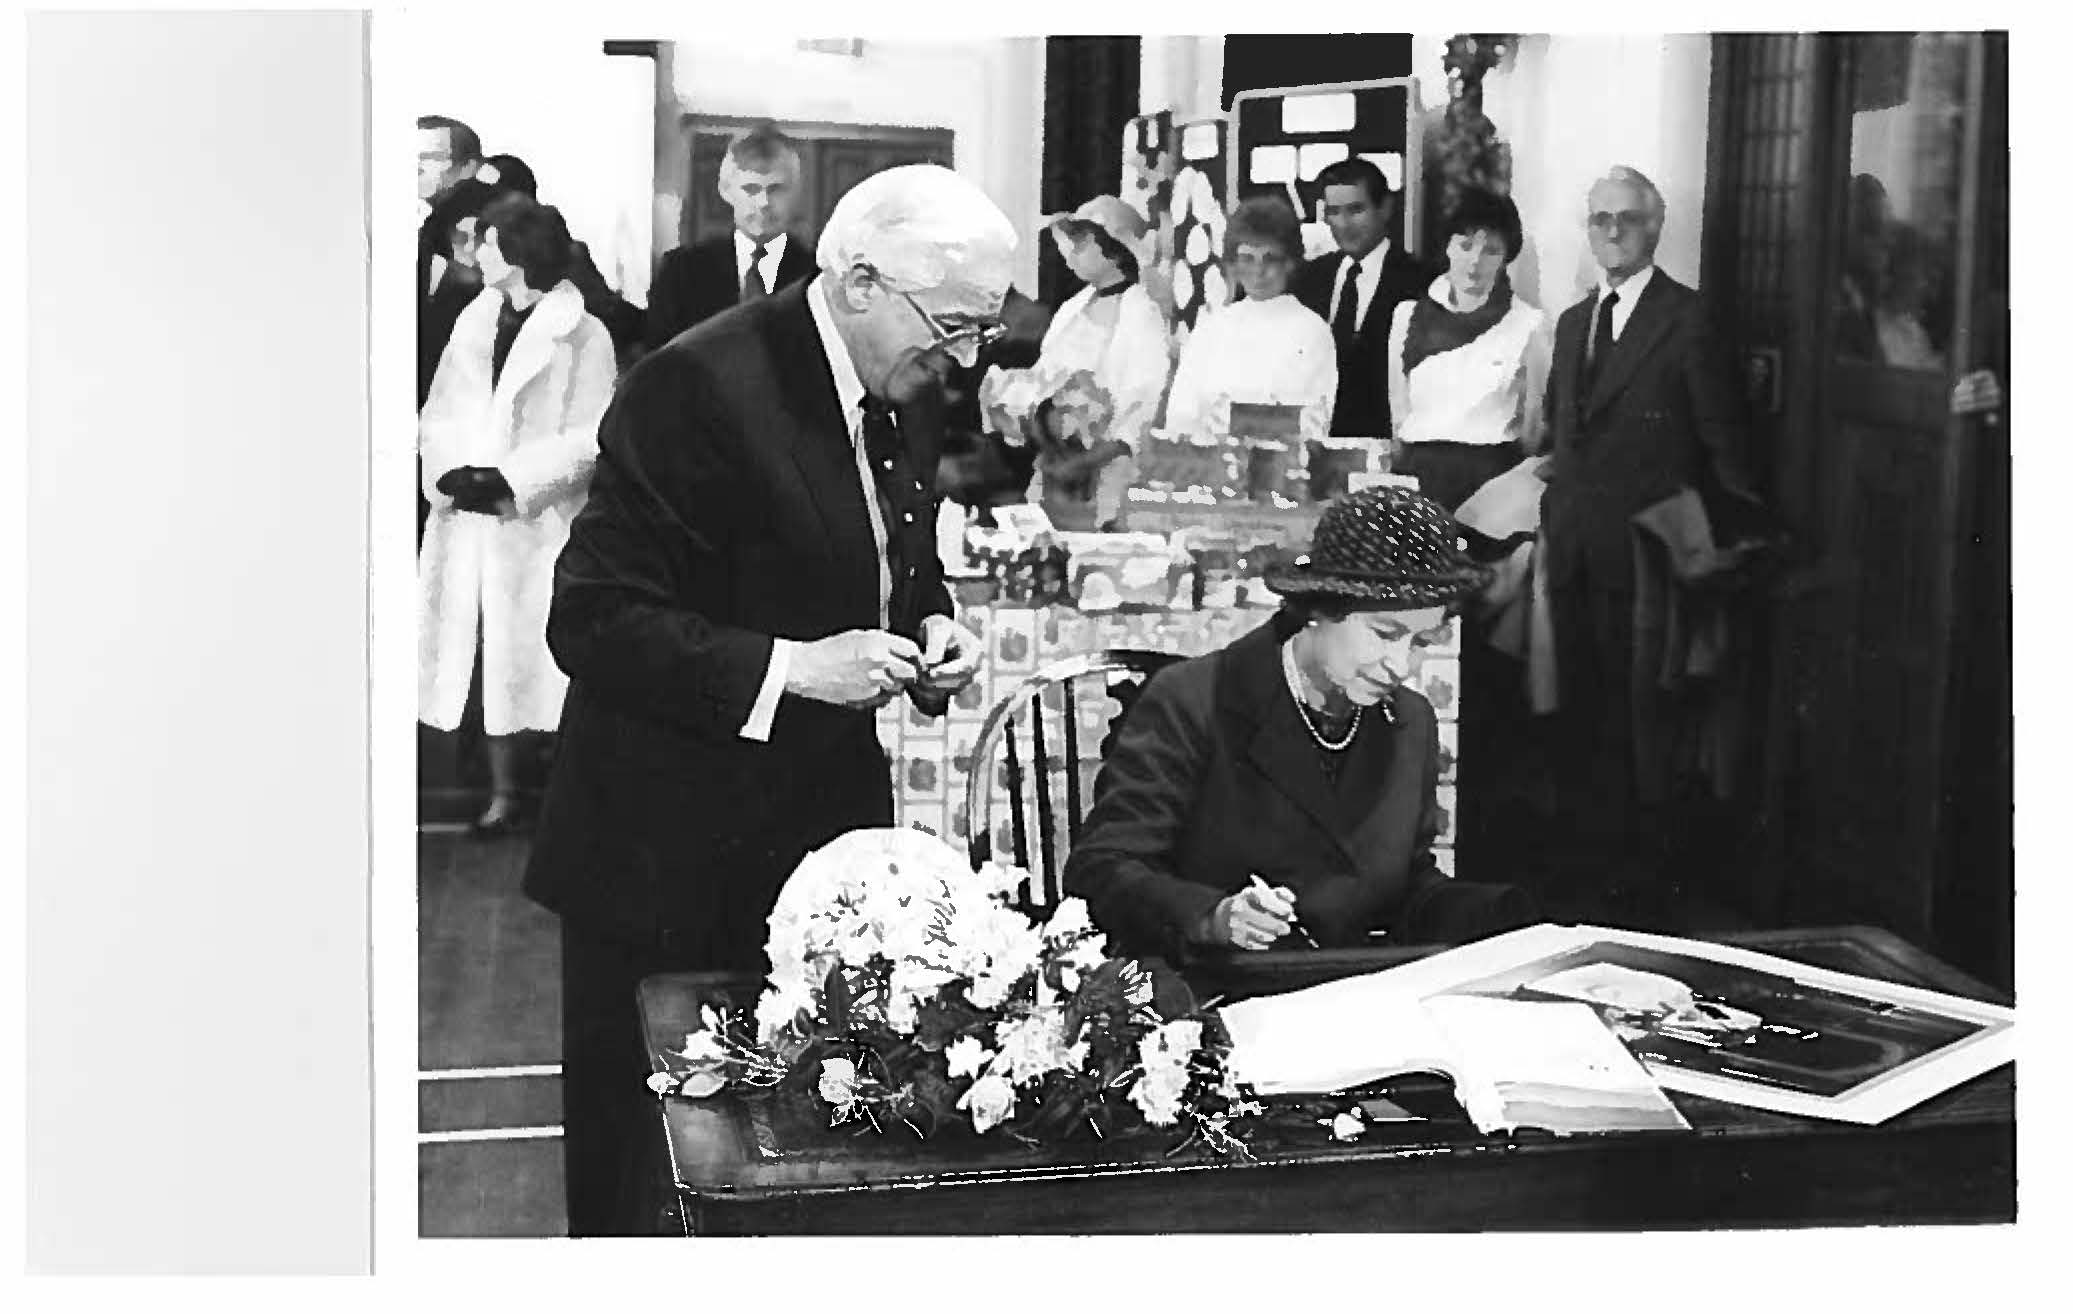 The Queen signs a book to commemorate her visit.